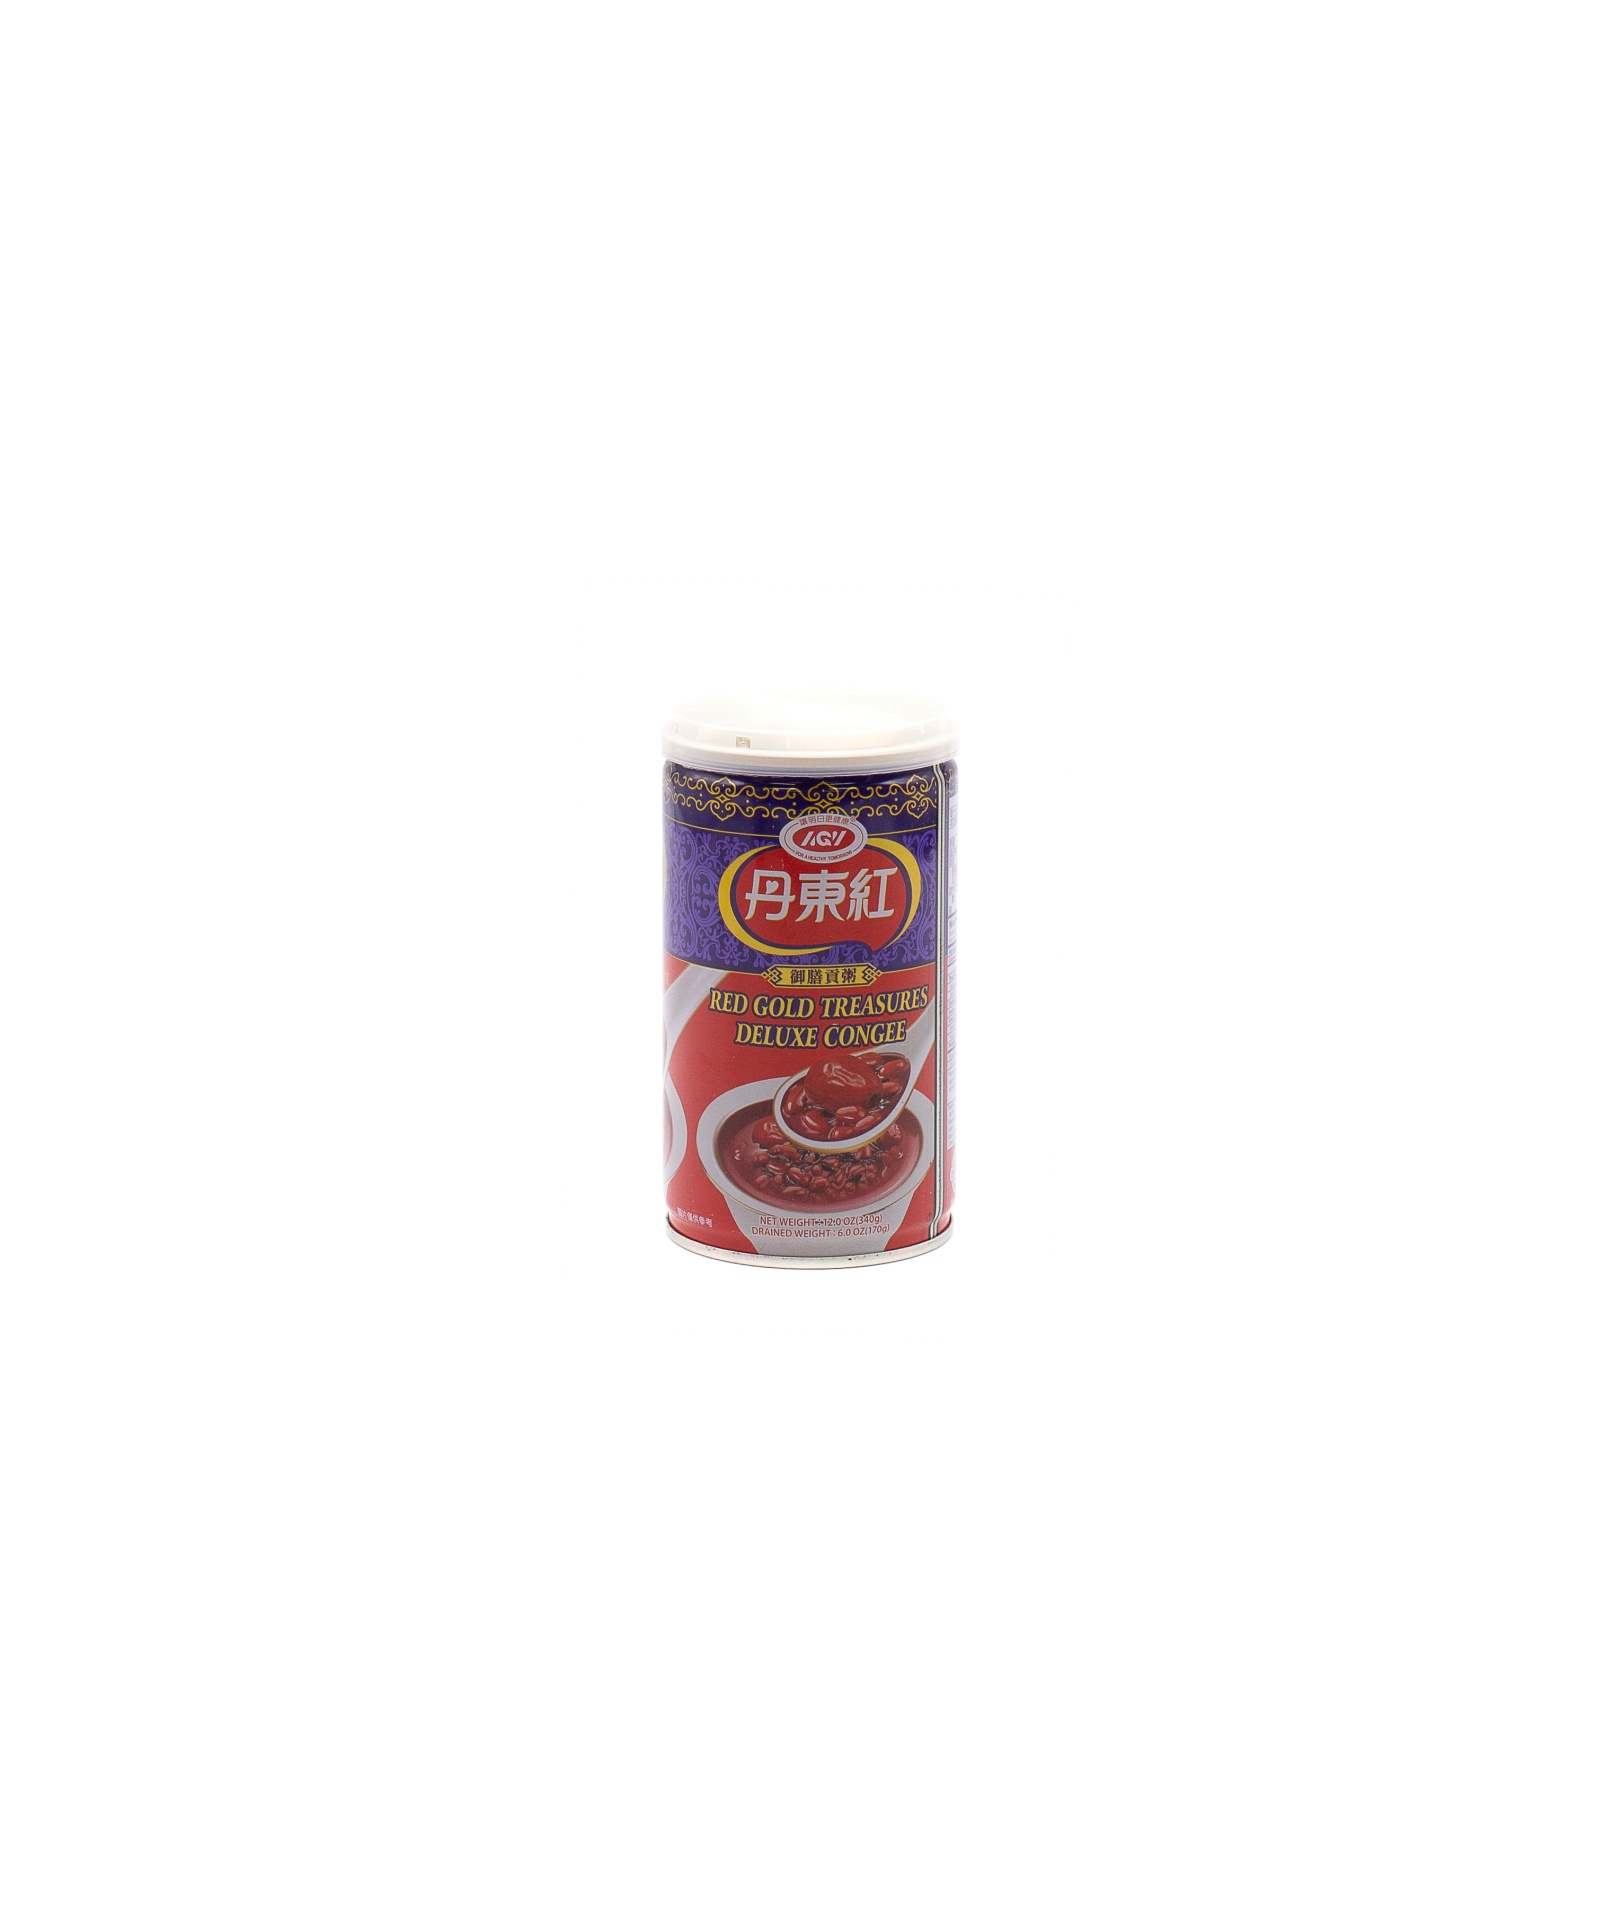 slide 1 of 1, AGV Red Gold Treasures Deluxe Congee, 340 gram